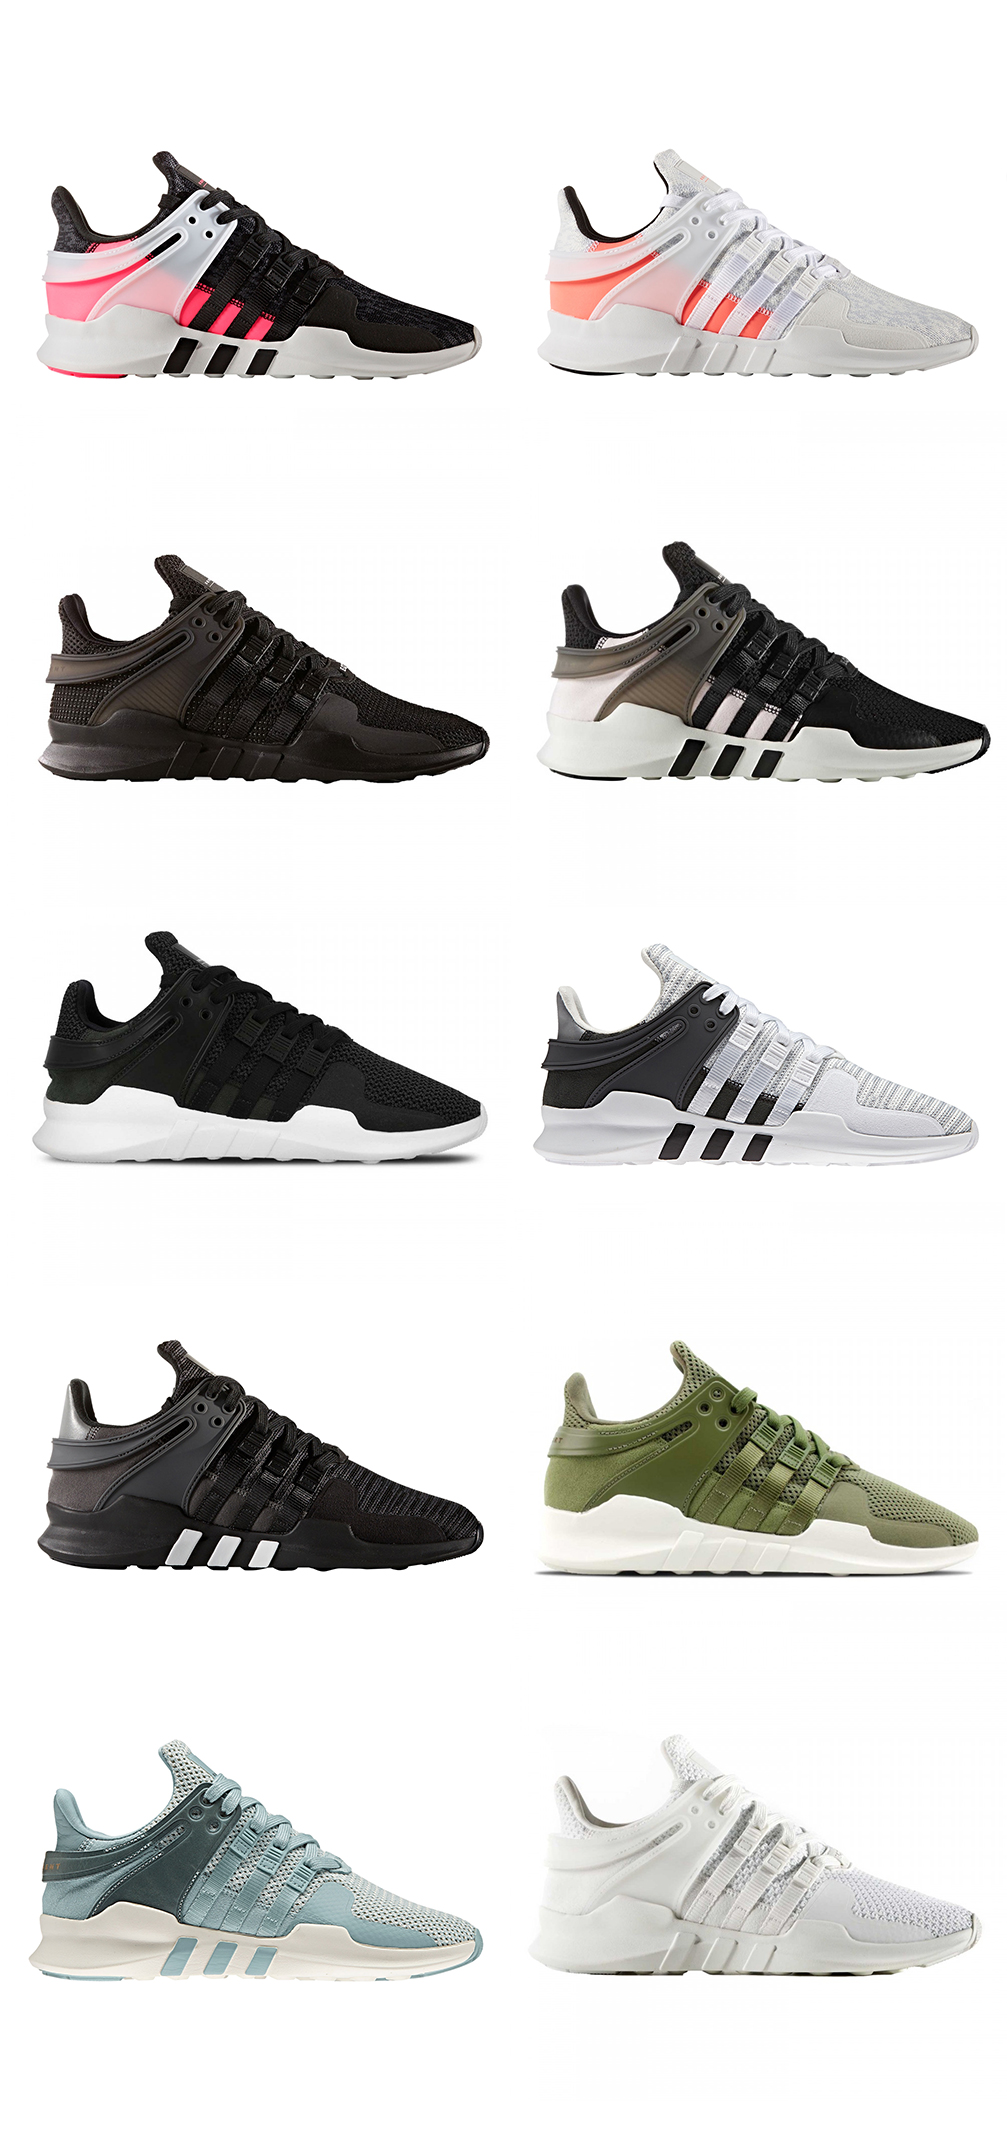 scarpe adidas eqt support adv arcobaleno buy clothes shoes online